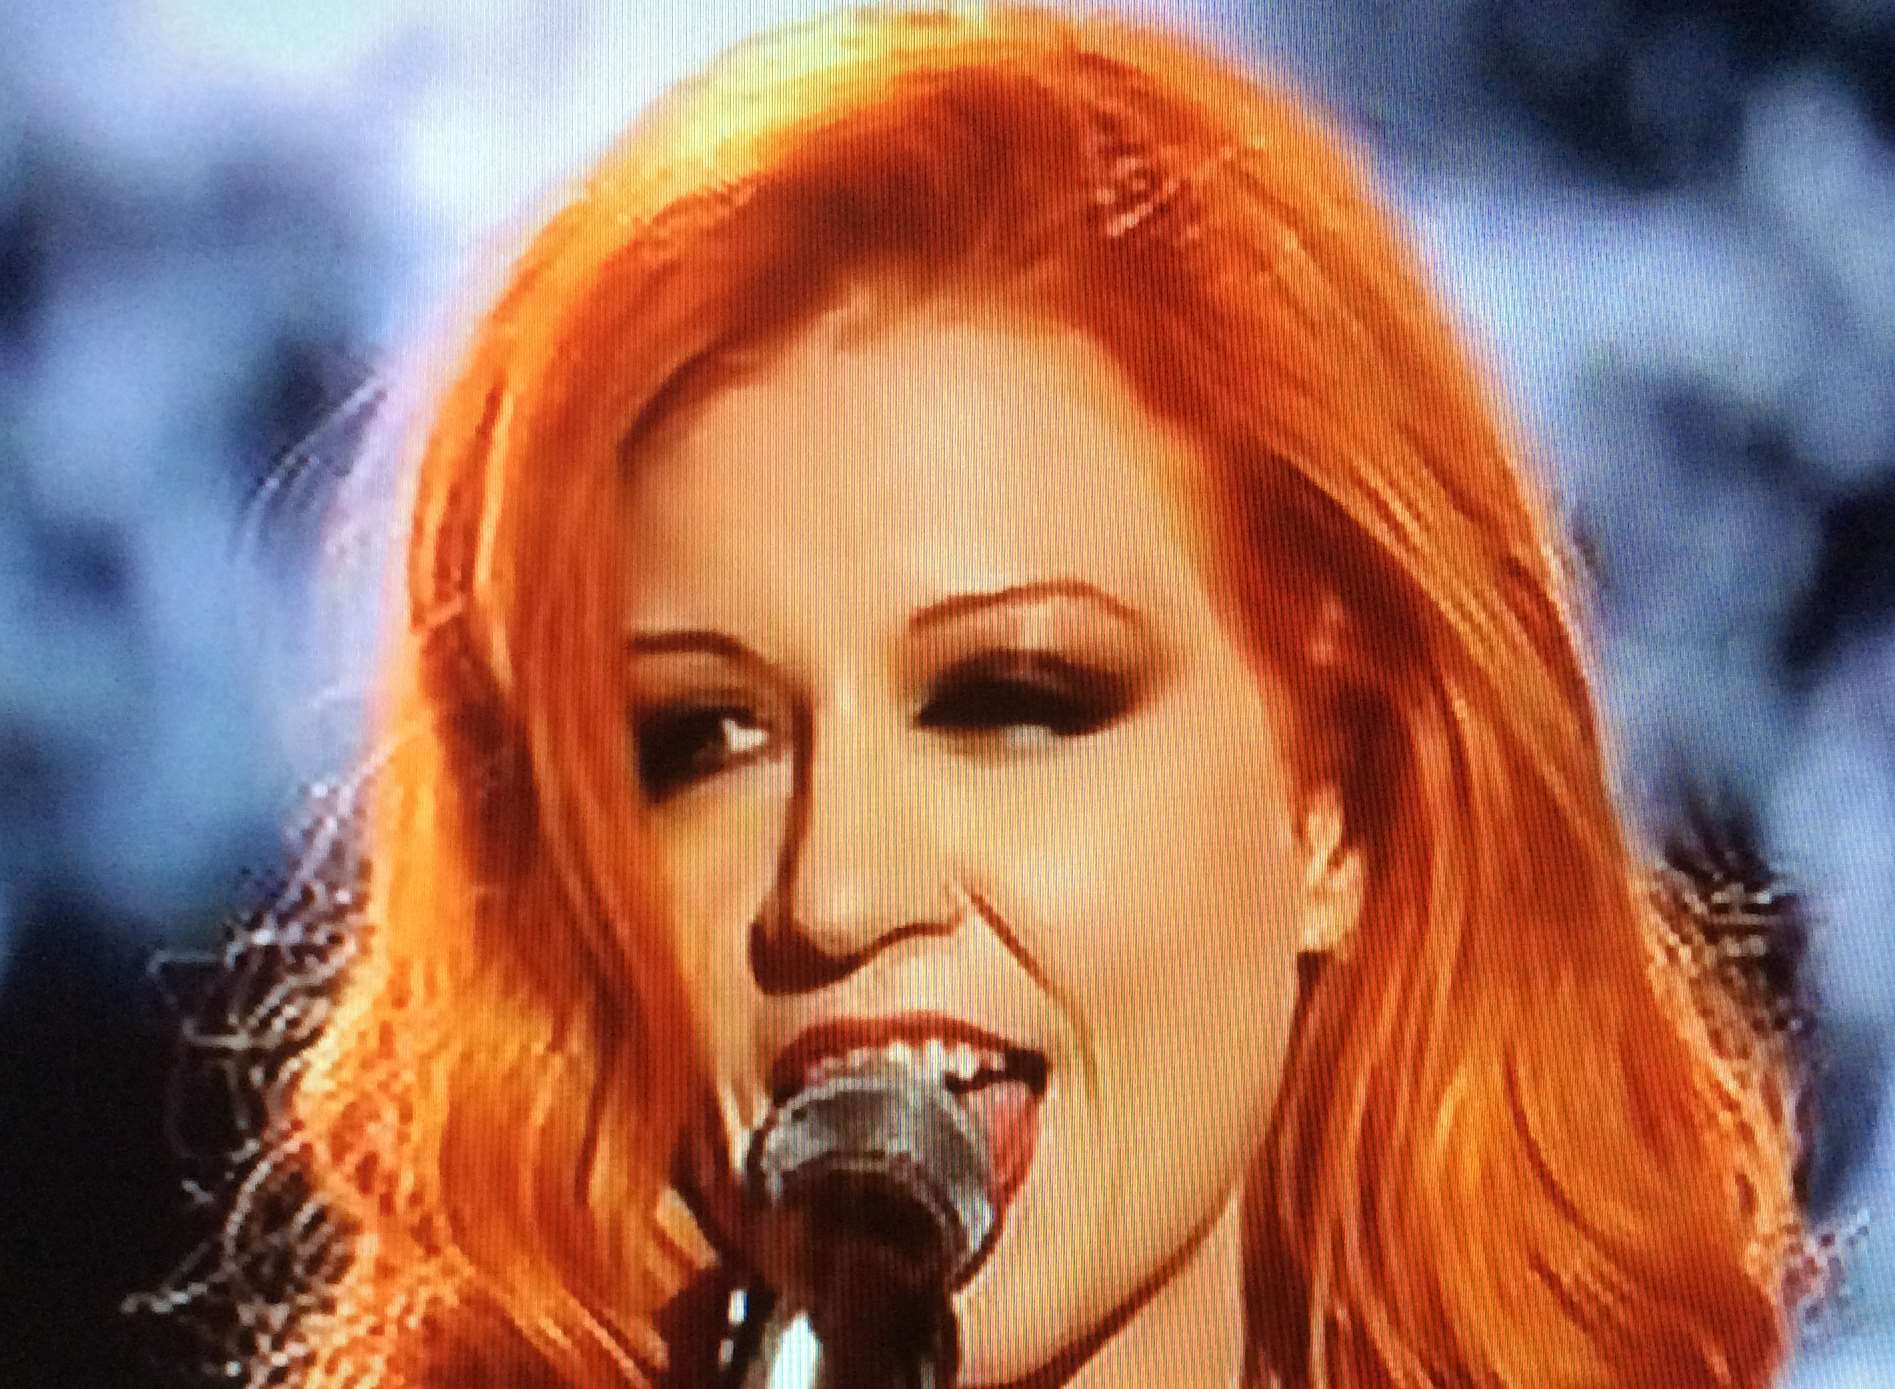 Ivy Paige on ITV's The Voice